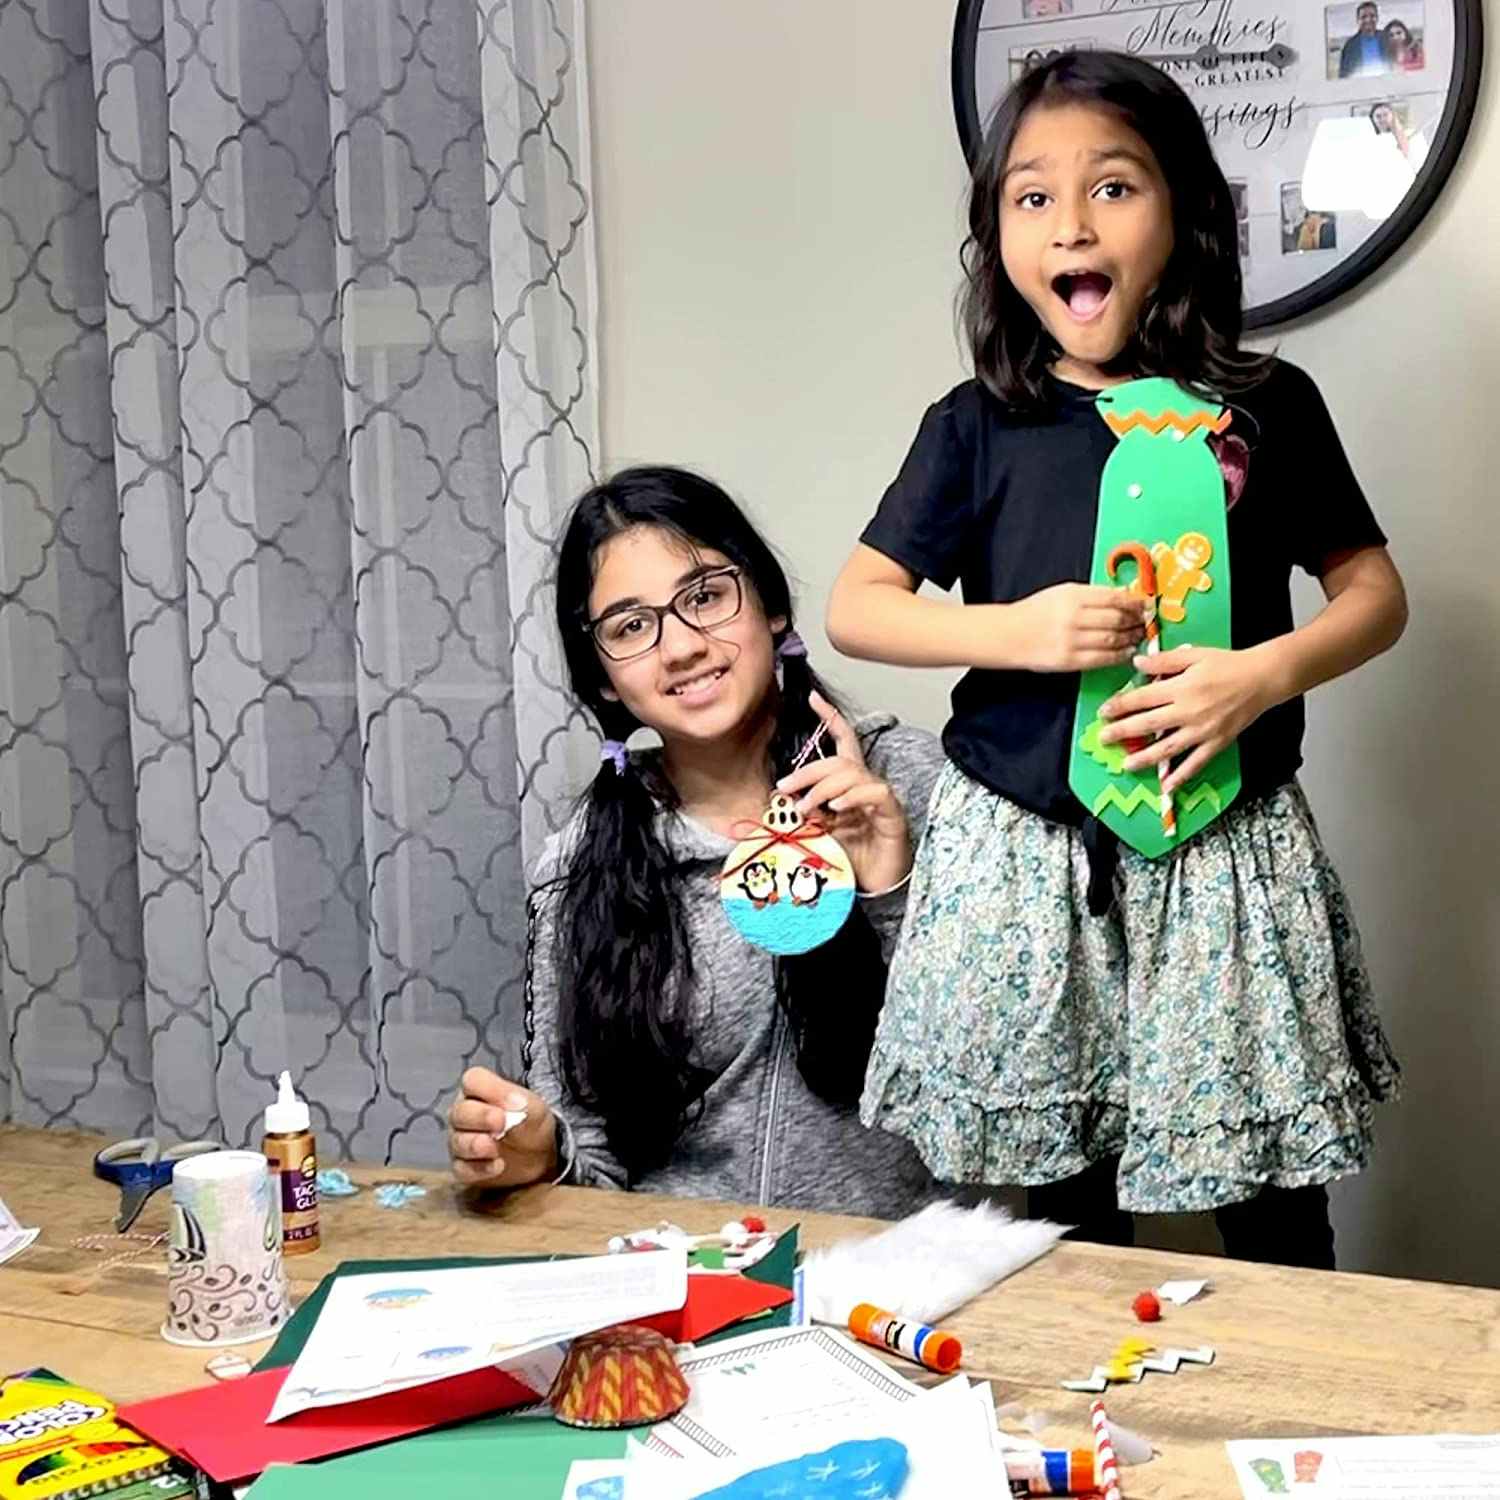 Two young girls sitting at a dining table doing crafts